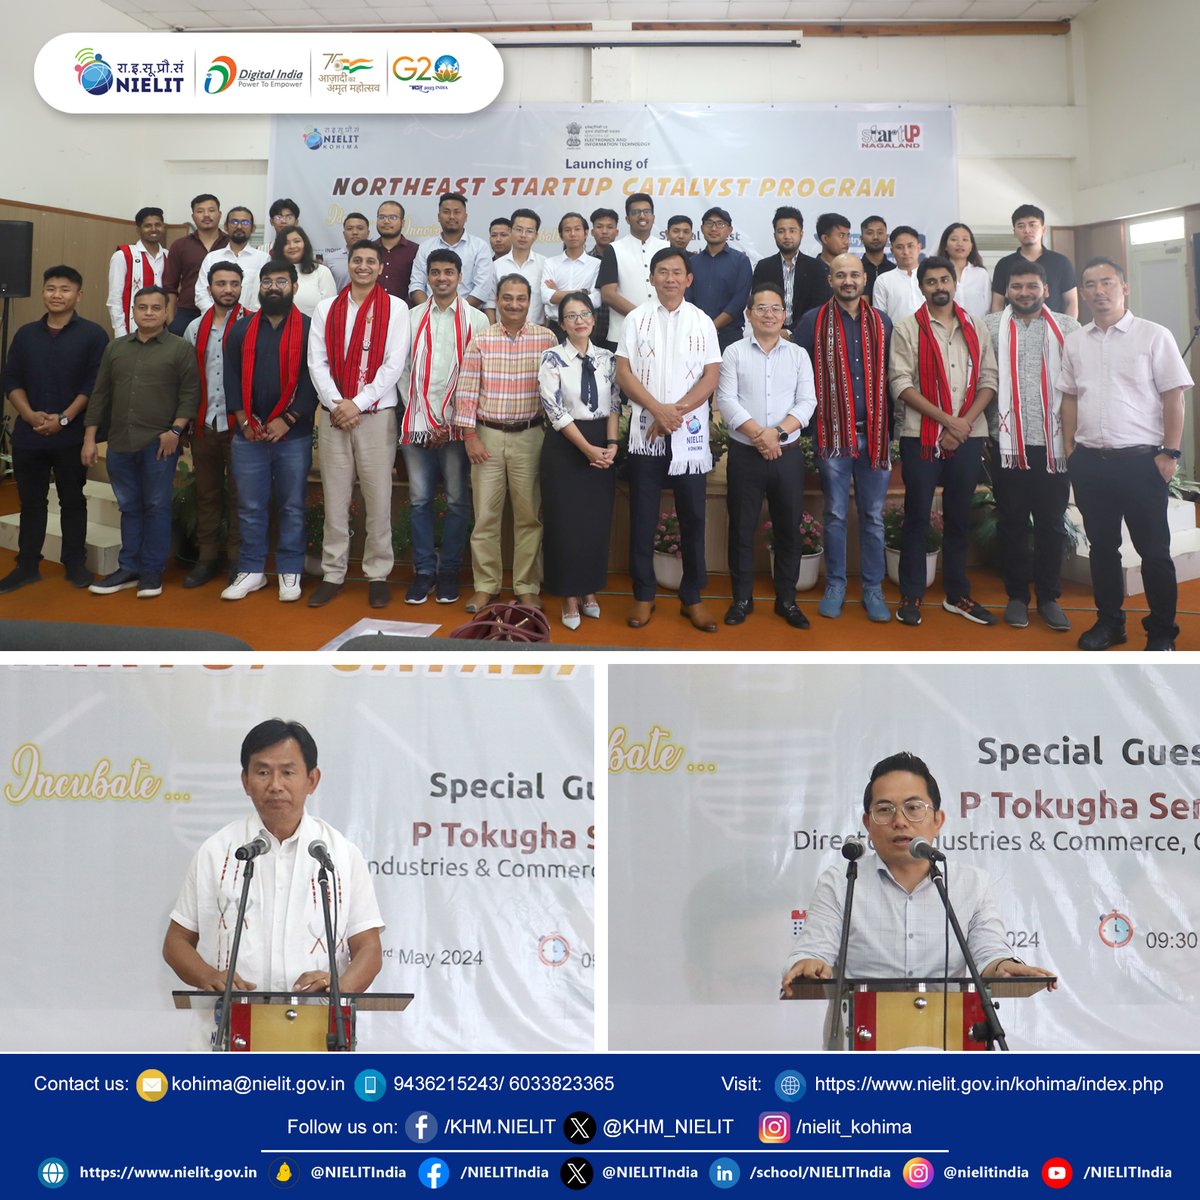 Launch of the Northeast Startup Catalyst Program at NIELIT Kohima on May 22, 2024! Shri P. Tokugha Sema, Director of Industries & Commerce, Govt. of Nagaland, grace as the special guest for the occasion. @NIELITIndia @GoI_MeitY  @startupindia @startupnagaland @dipr_nagaland